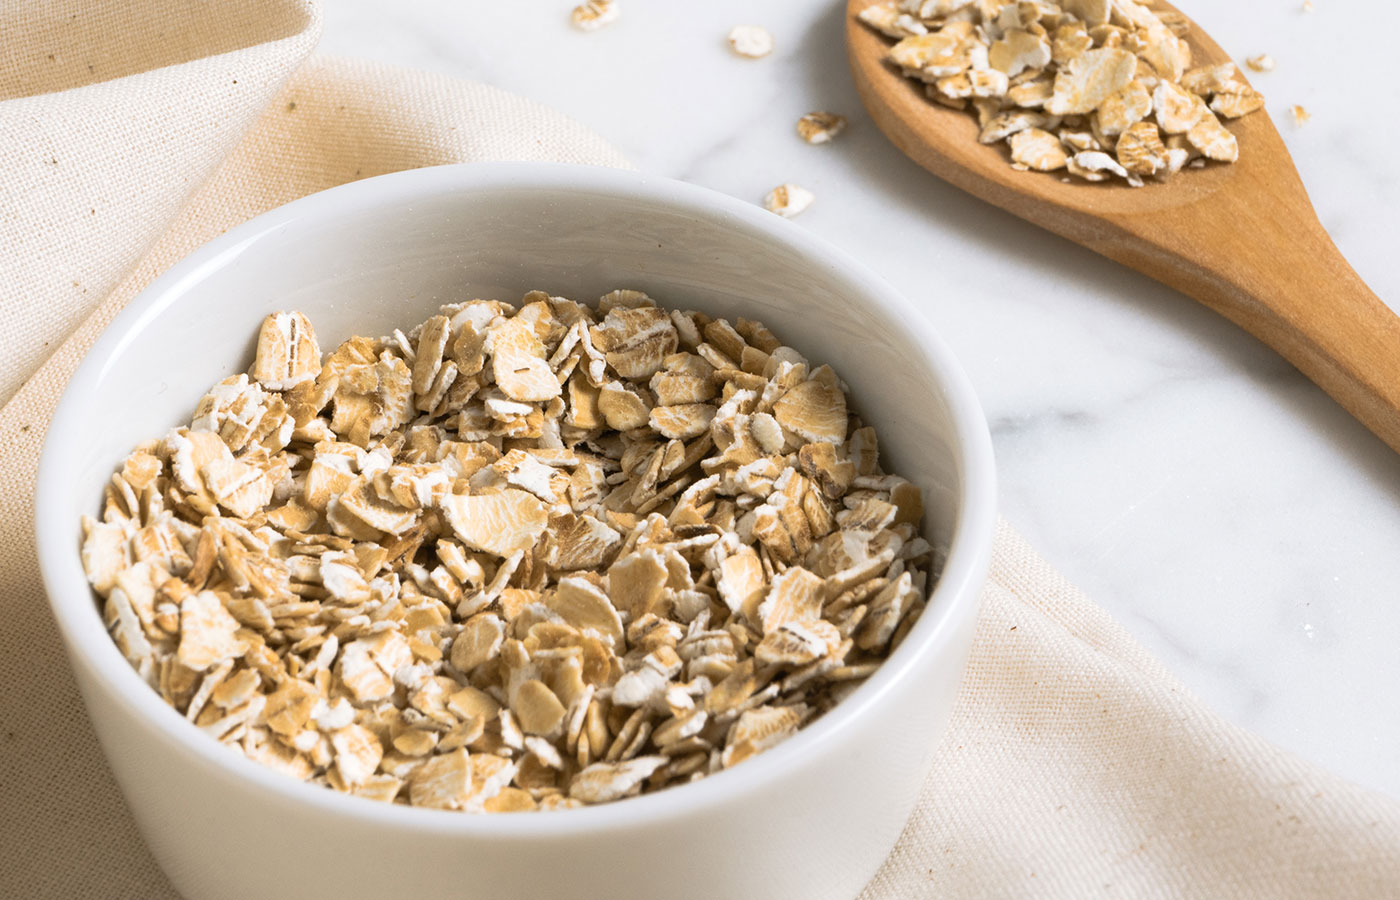 Are oats gluten-free? - Dr Libby